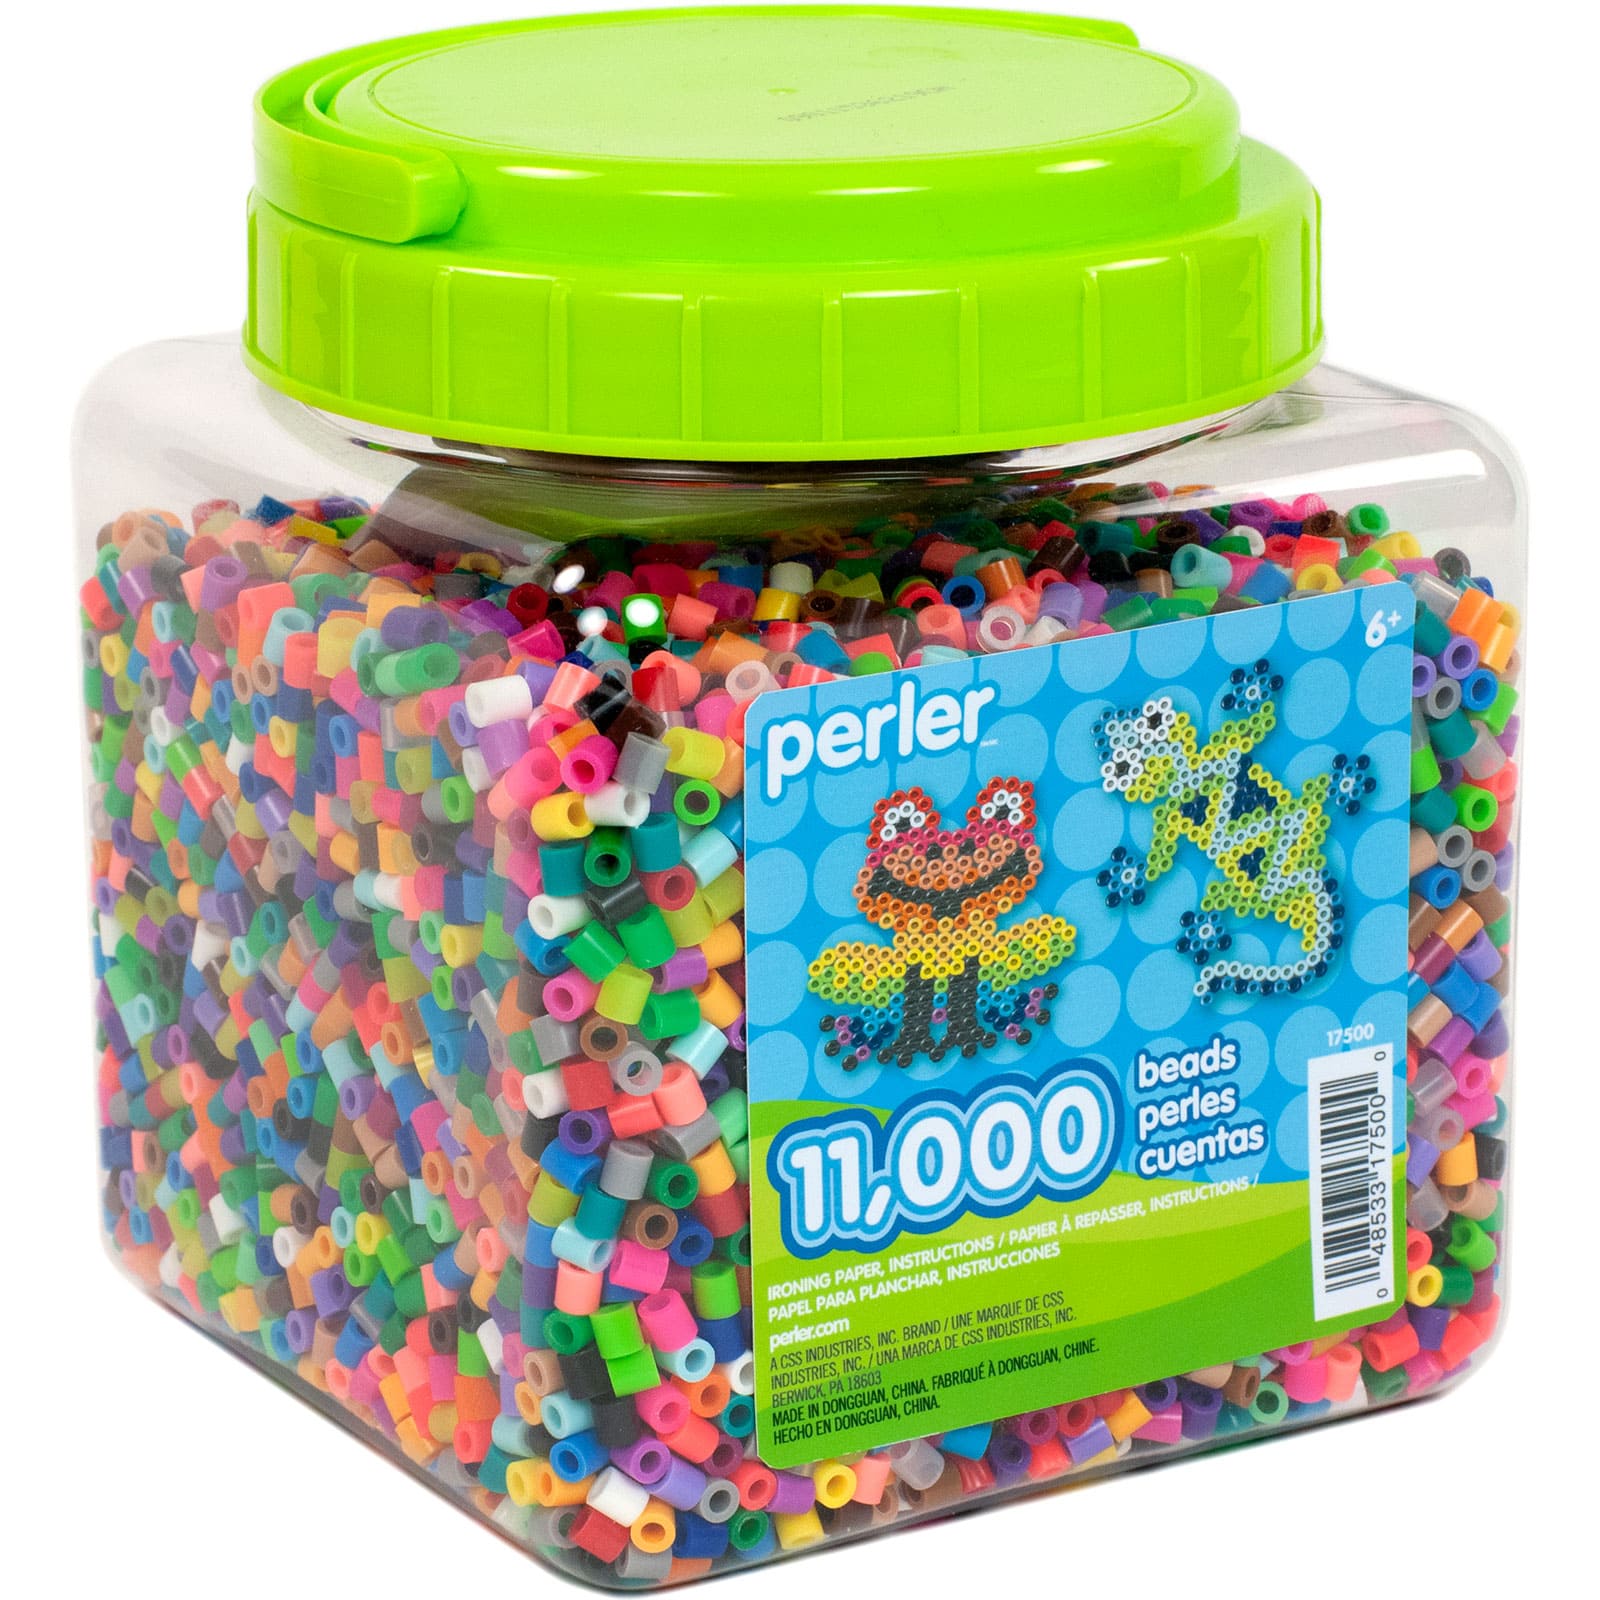 Perler Large Clear Pegboards 2-Pk. | Michaels